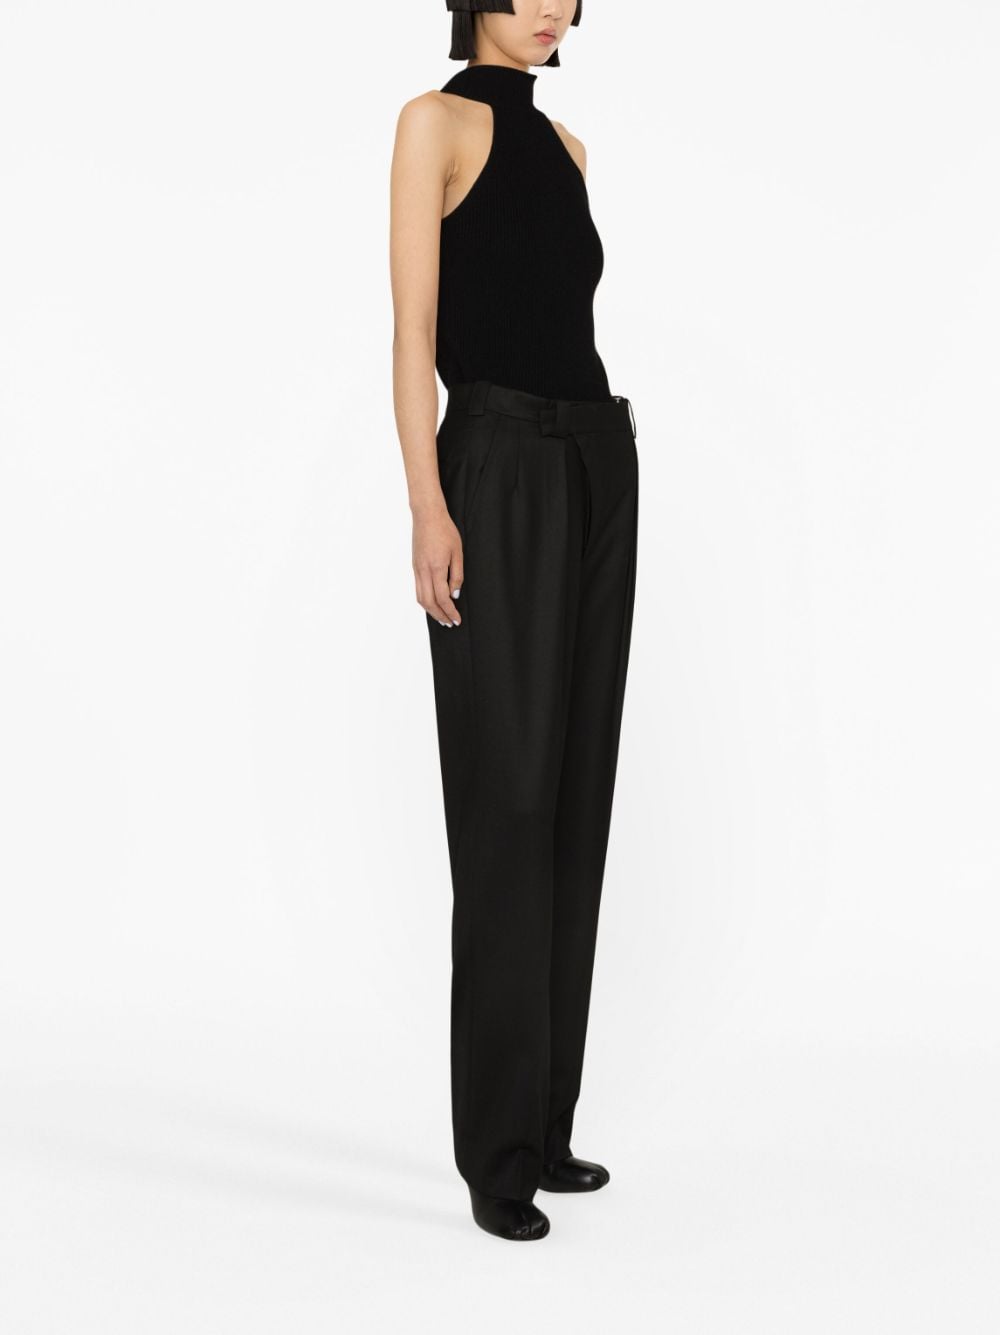 Straight wrap trousers